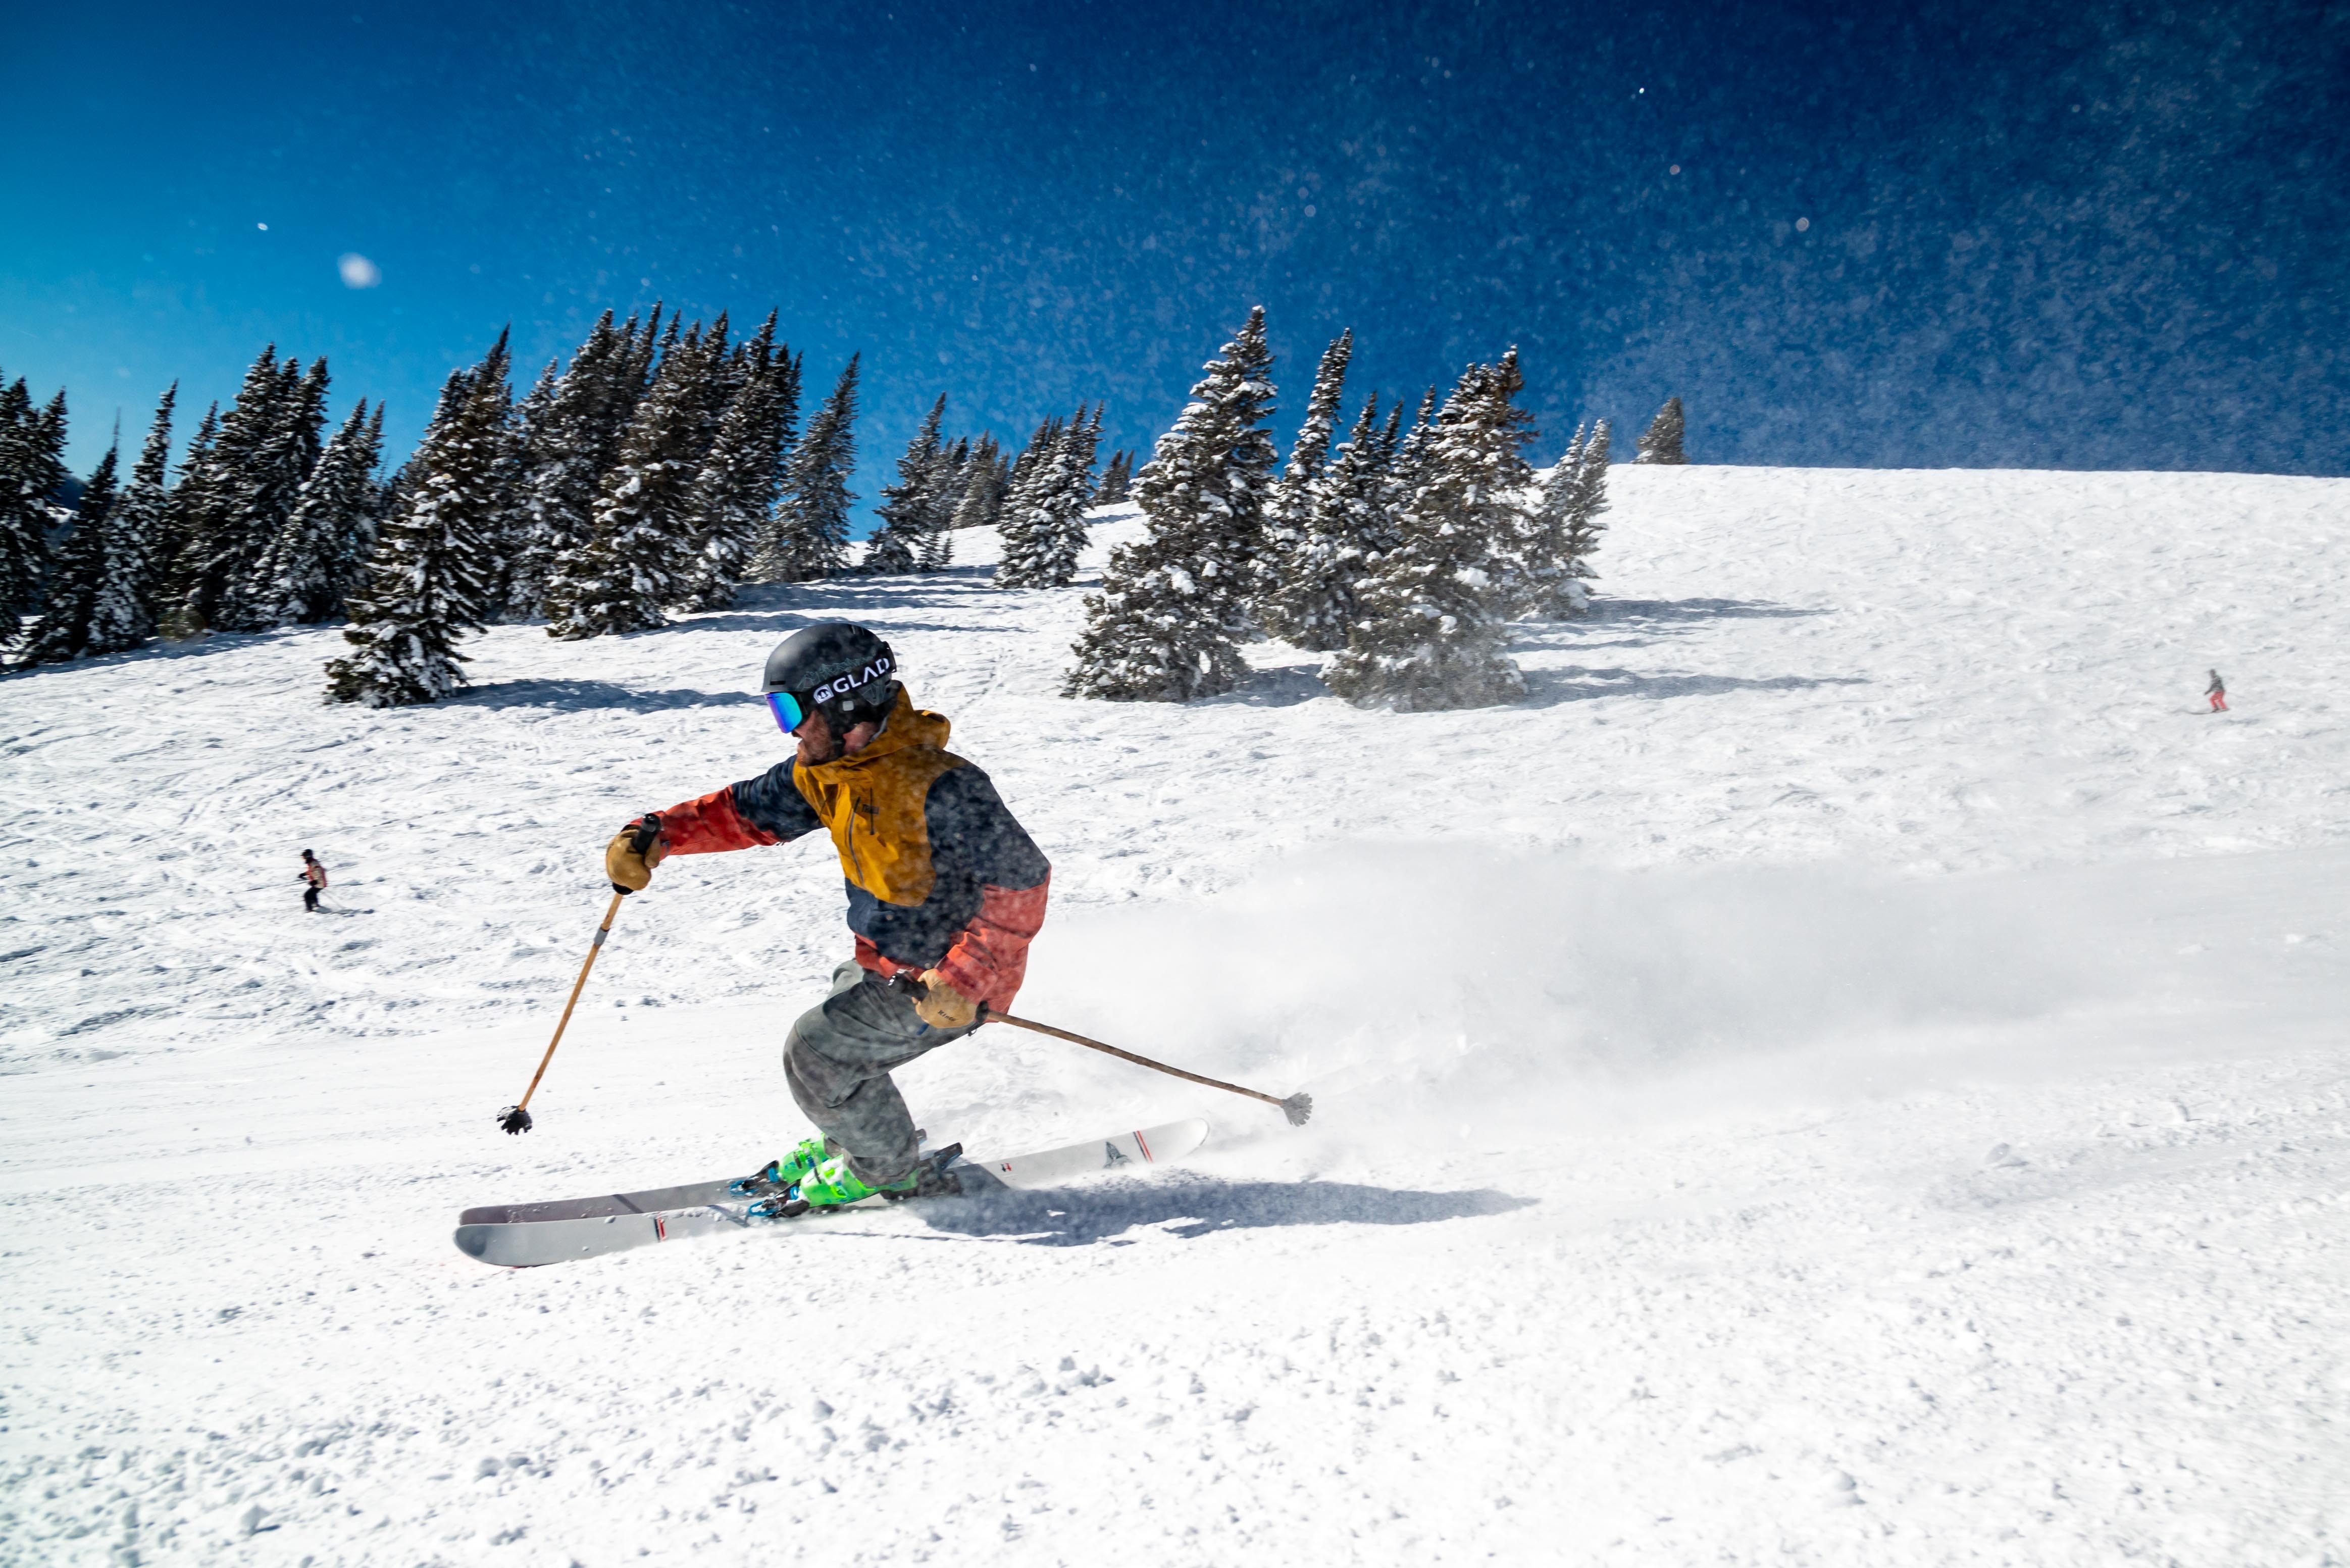 Fit To Ski. Fitness tips for skiers. part 2